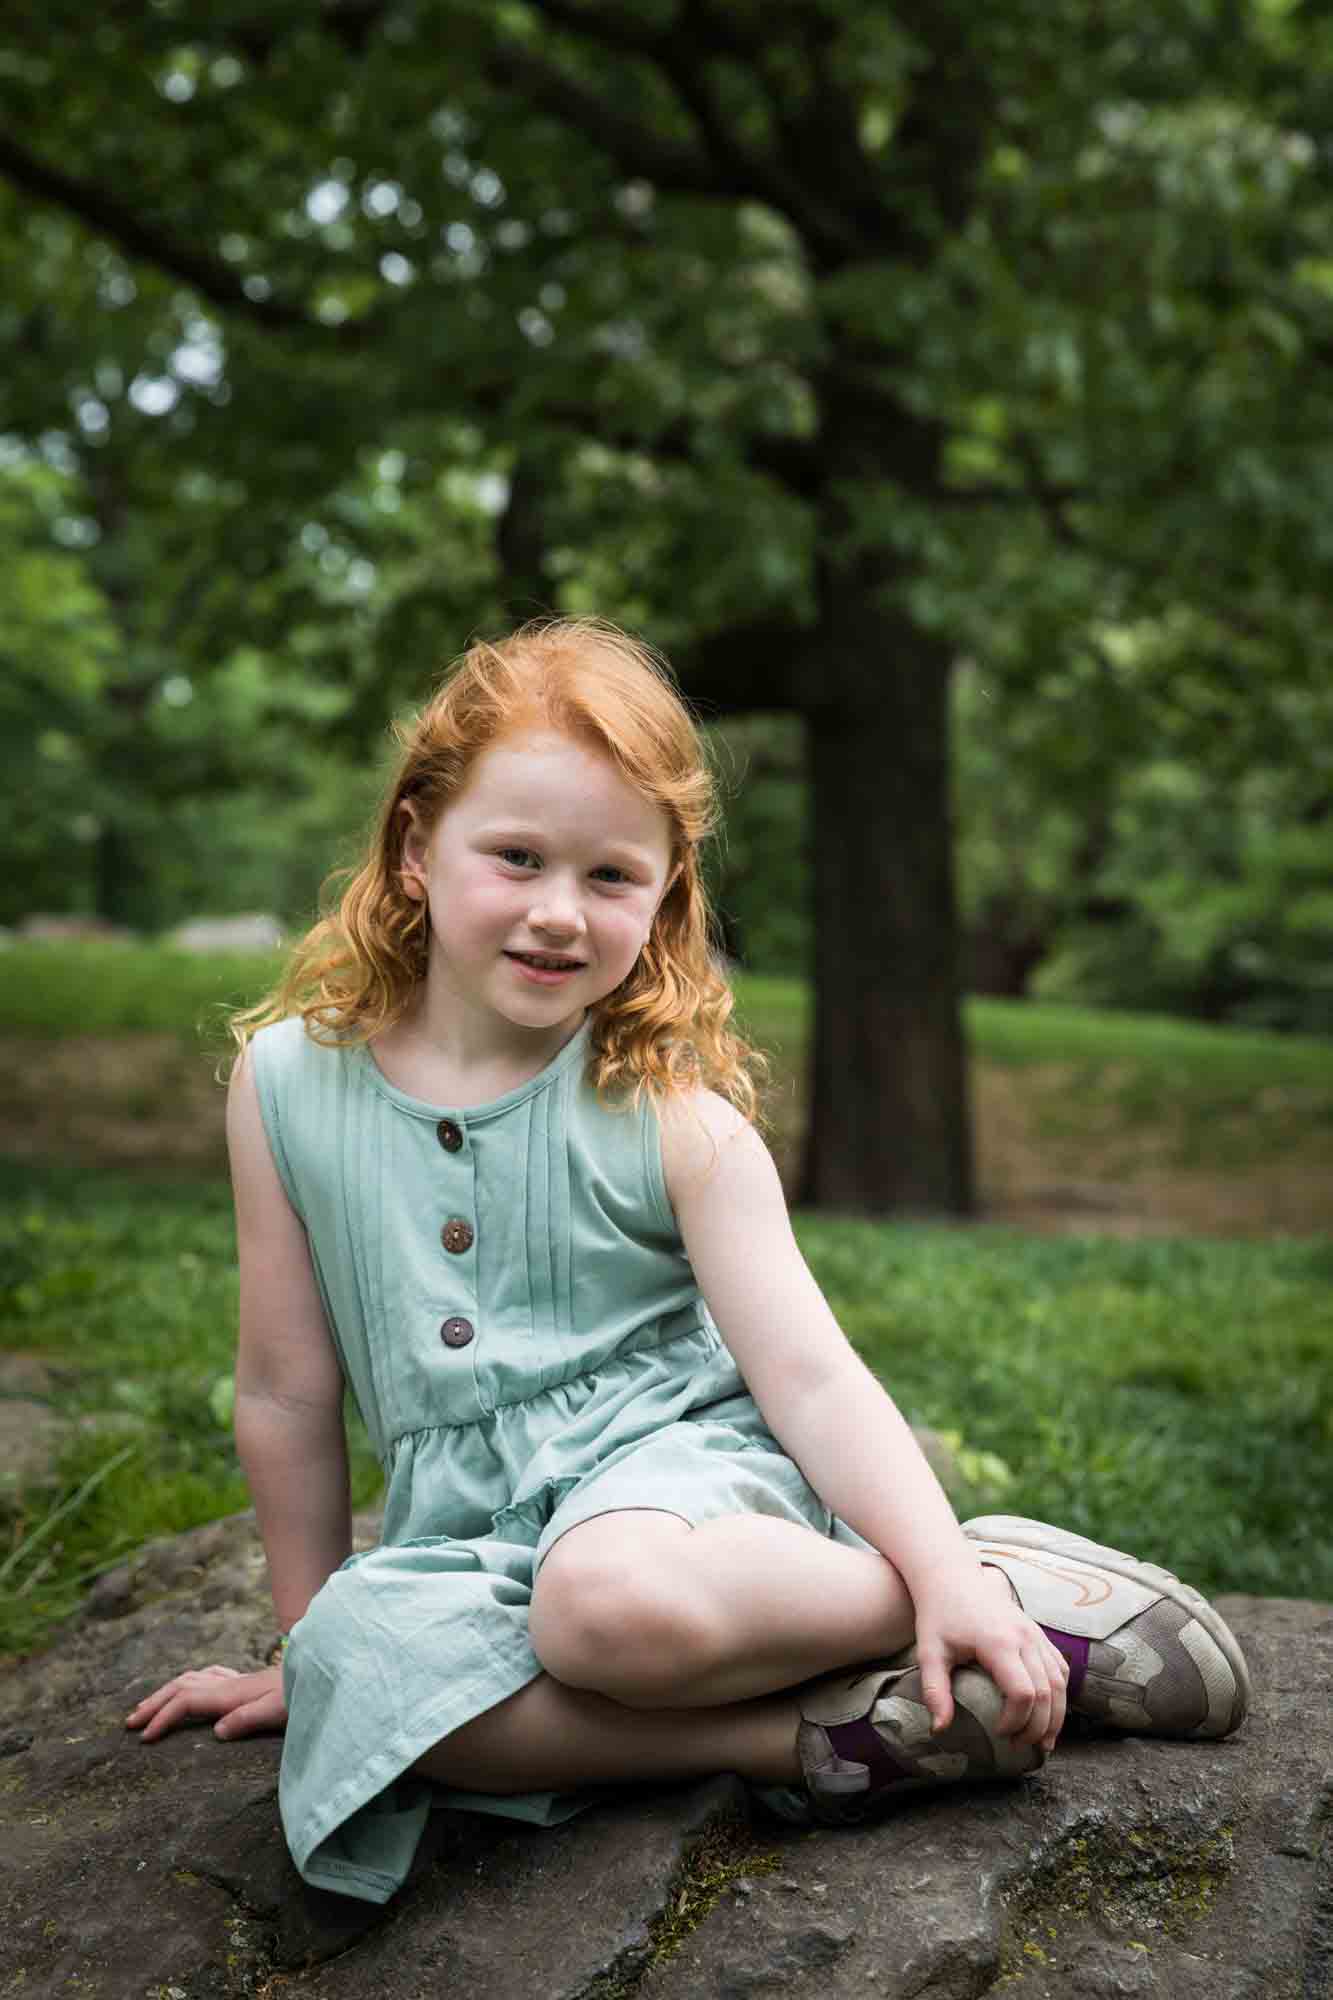 Red-haired little girl wearing green dress sitting on rock during a Central Park family portrait session